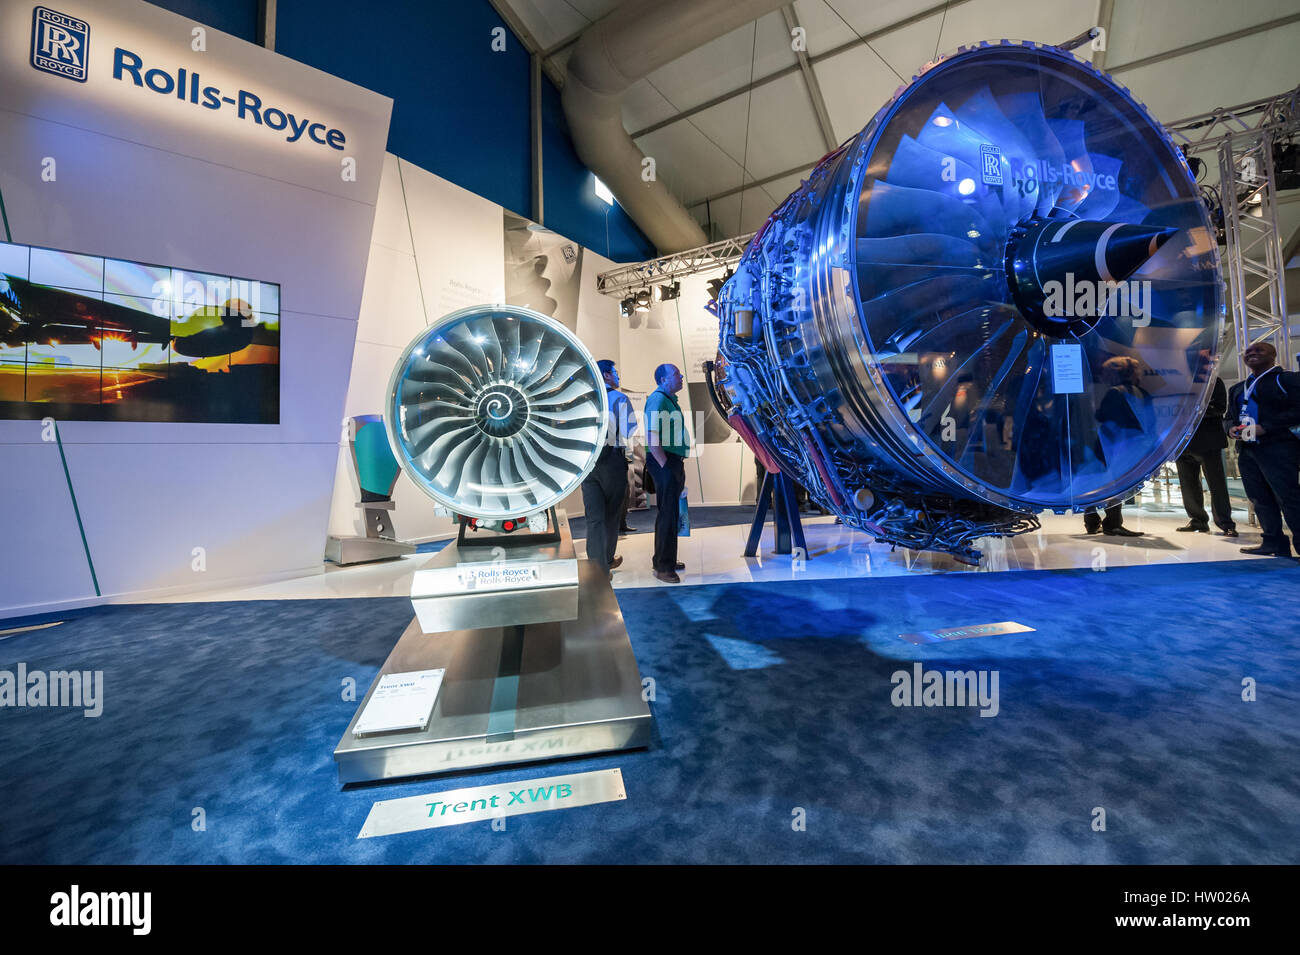 An exhibition by Rolls-Royce jet engines at the Farnborough Airshow, UK on July 12, 2012 Stock Photo